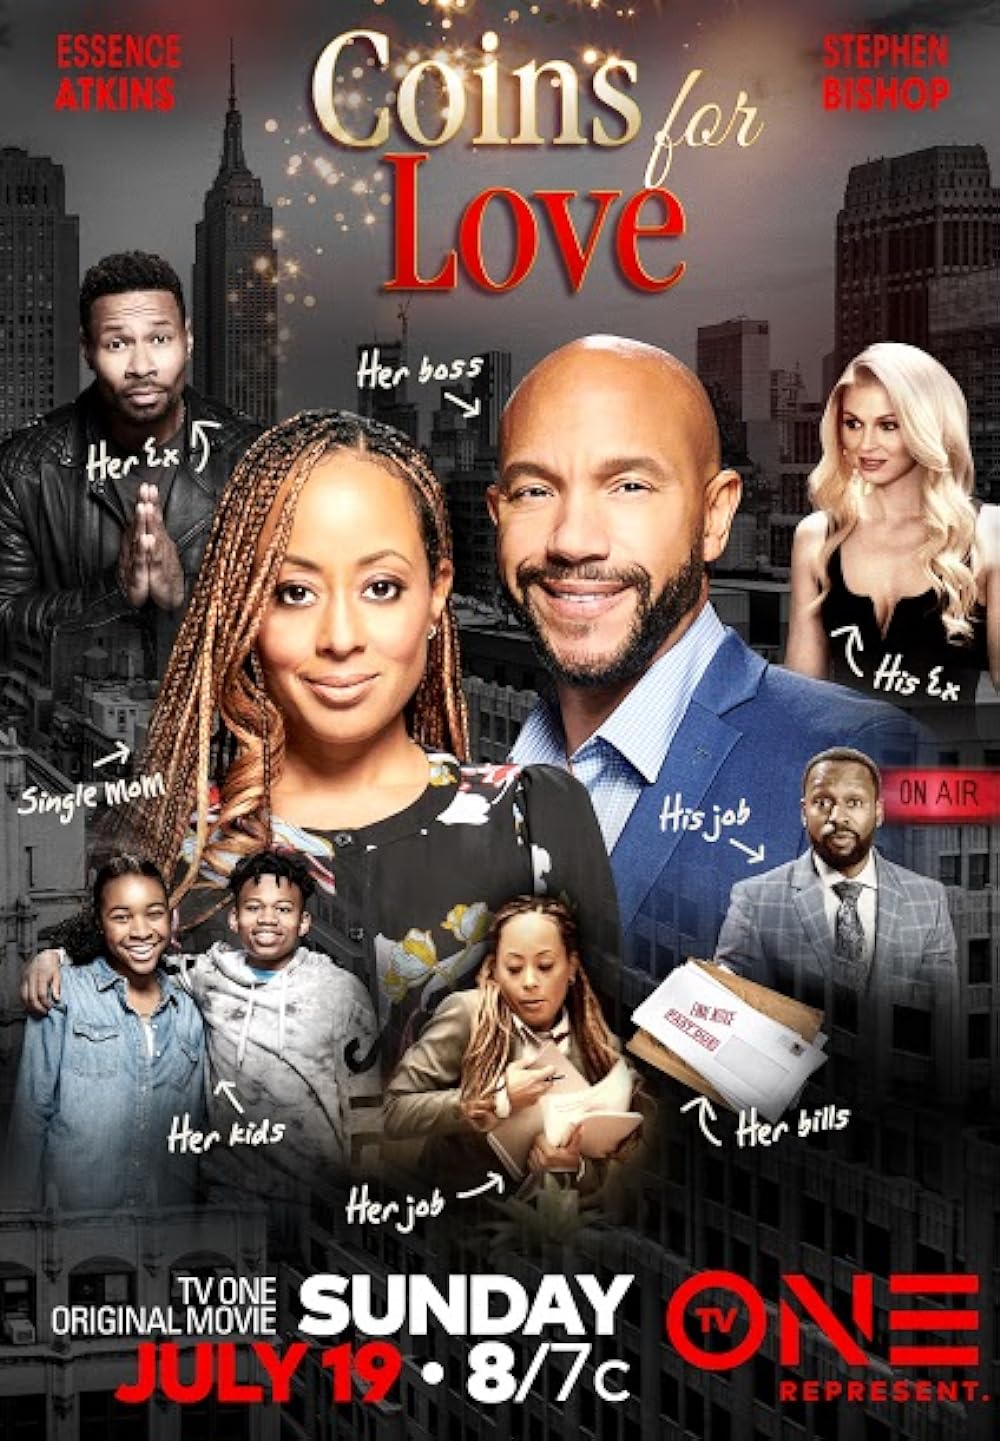 Movie Trailer: TV One's 'Coins for Love' [starring Essence Atkins] - That Grape Juice